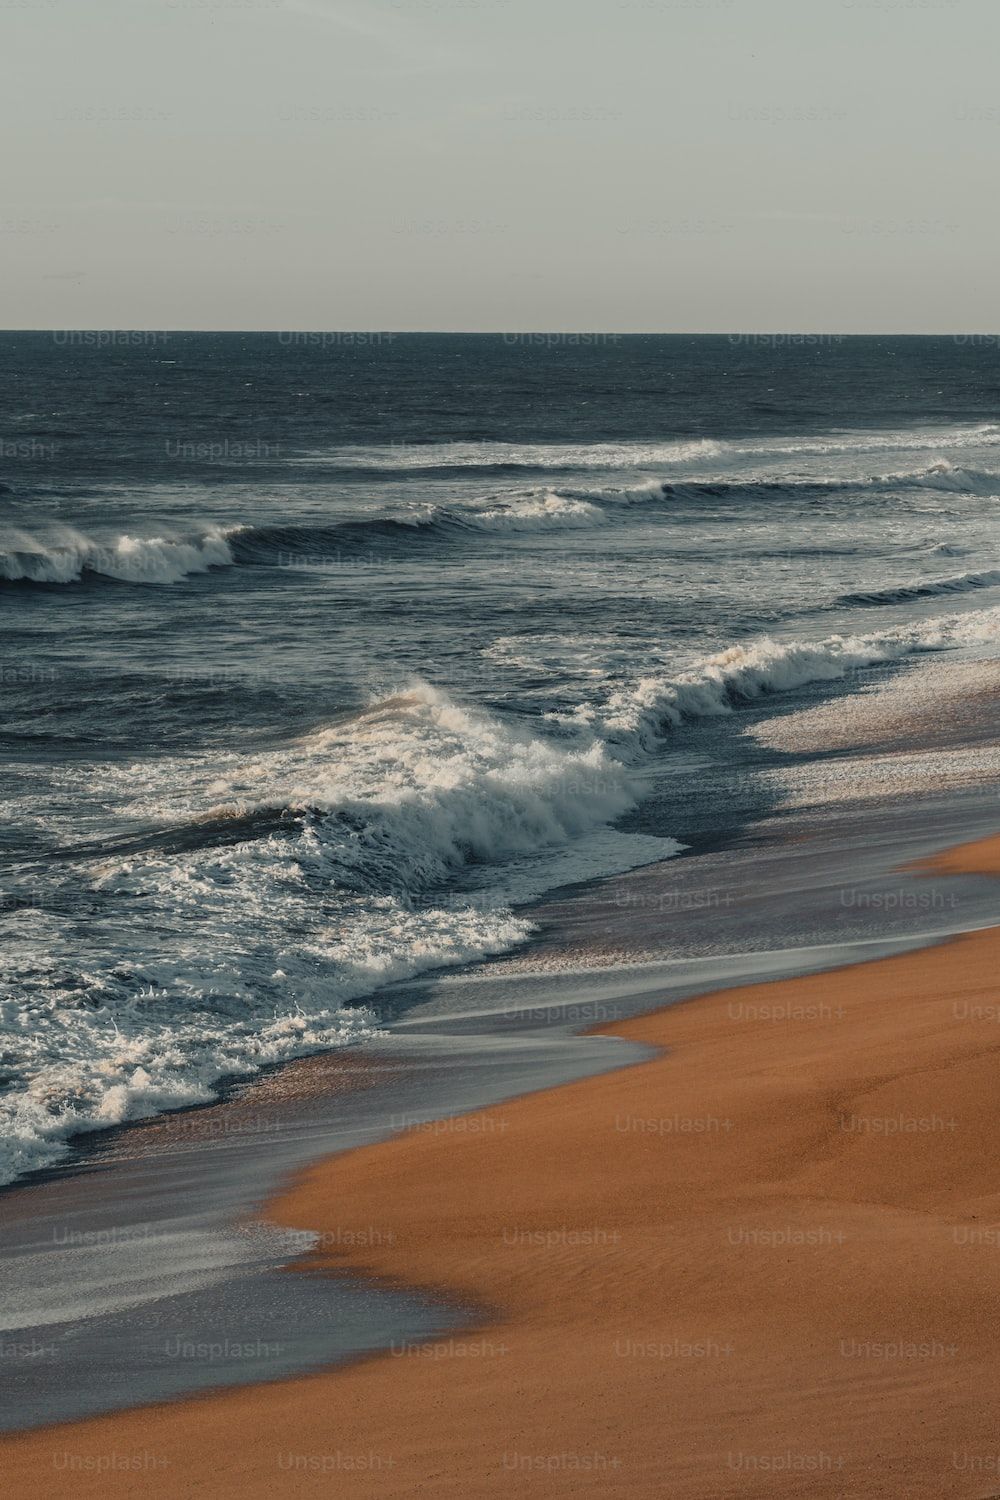 Ocean waves rolling onto a beach at sunset - Coast